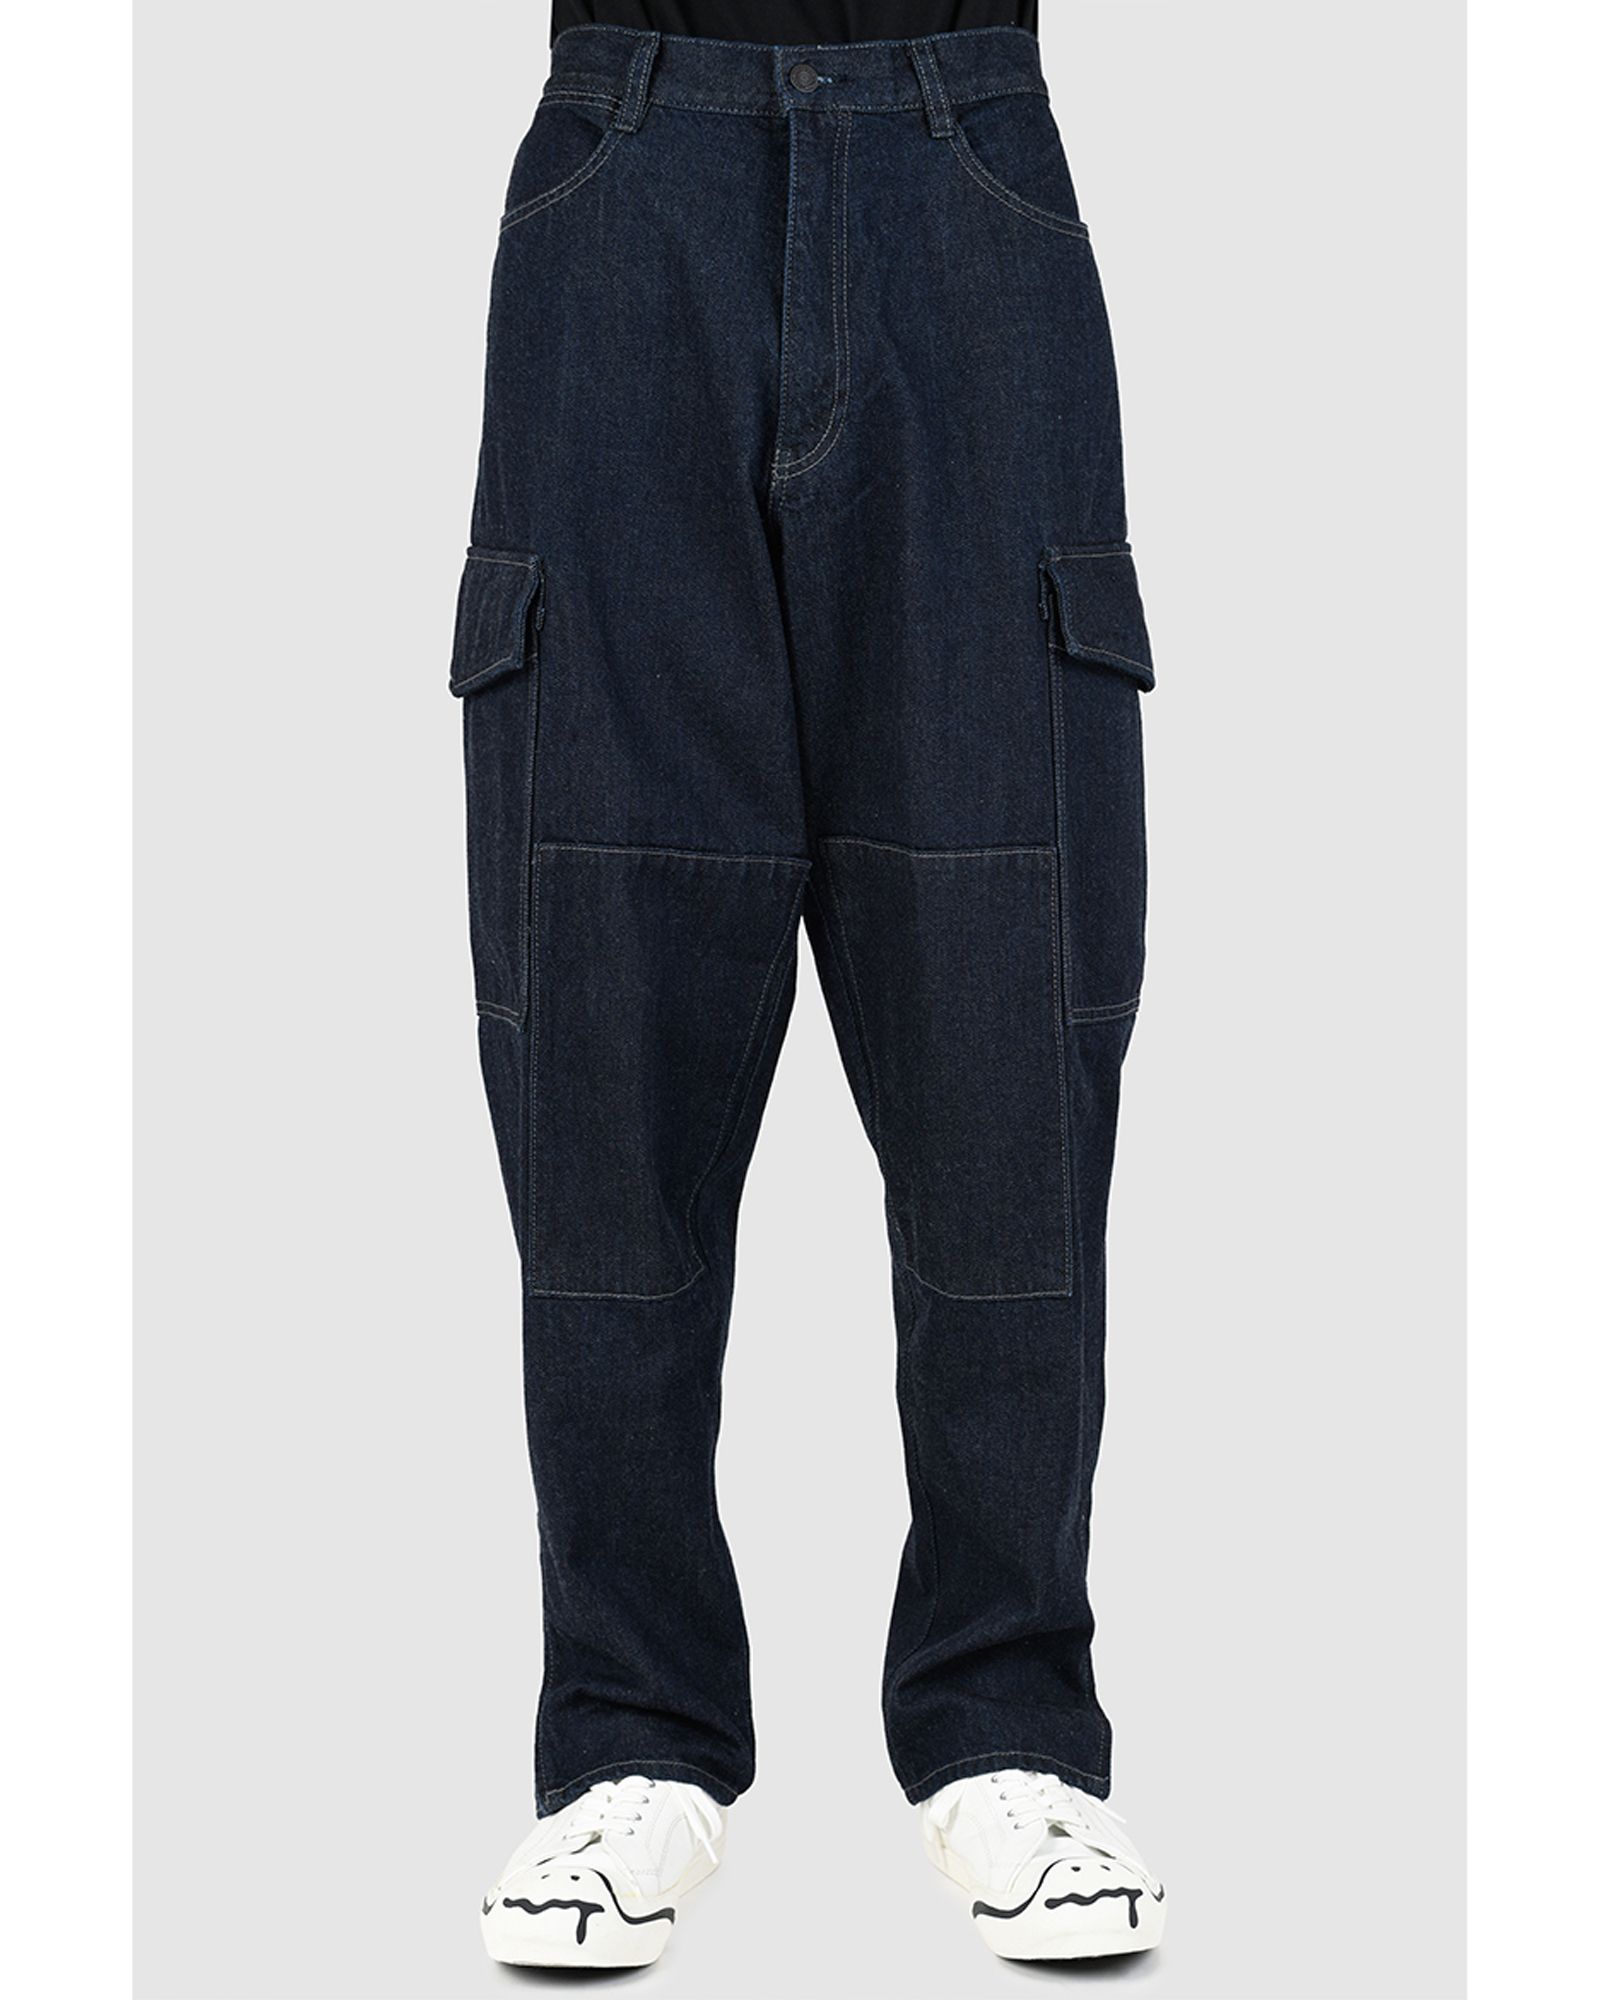 LAD MUSICIAN 22AW SHOE FLARE CARGO PANTS